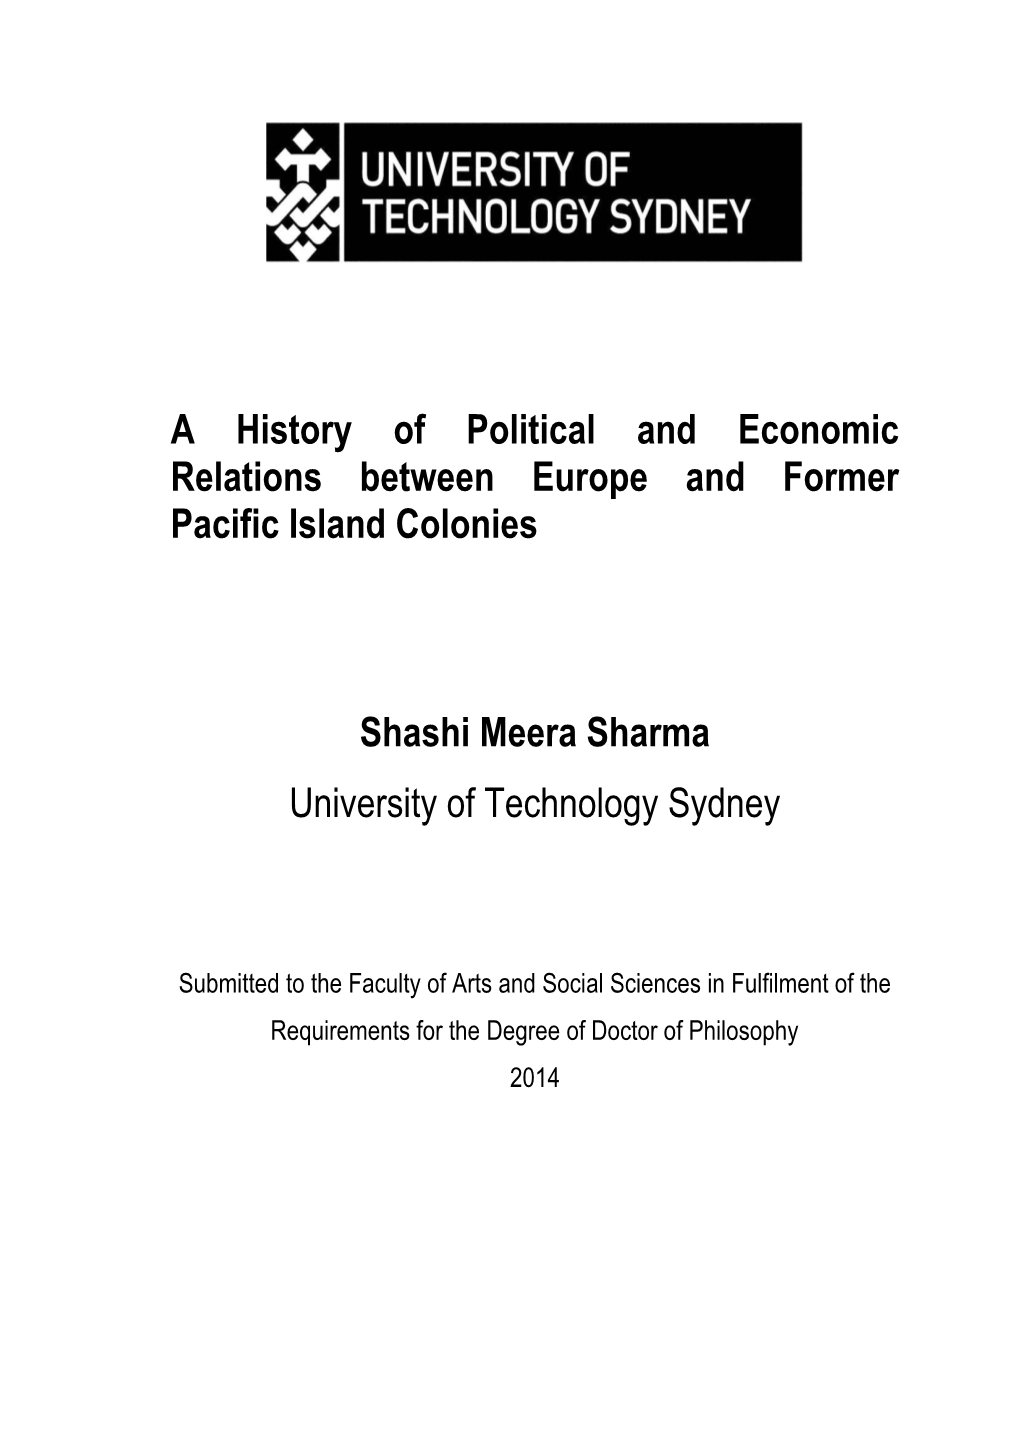 A History of Political and Economic Relations Between Europe and Former Pacific Island Colonies